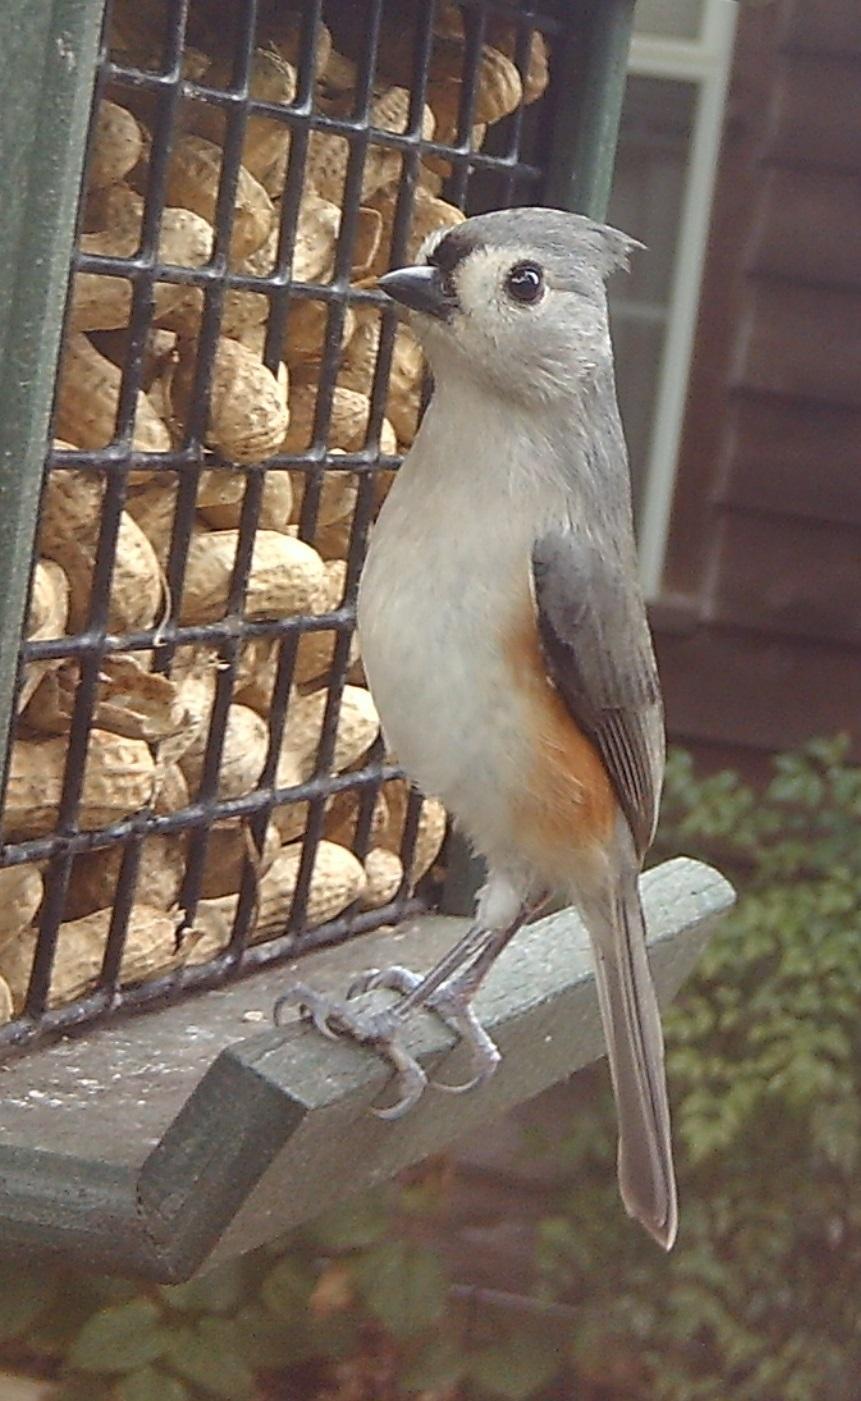 Tufted Titmouse Photo by Mike Ballentine